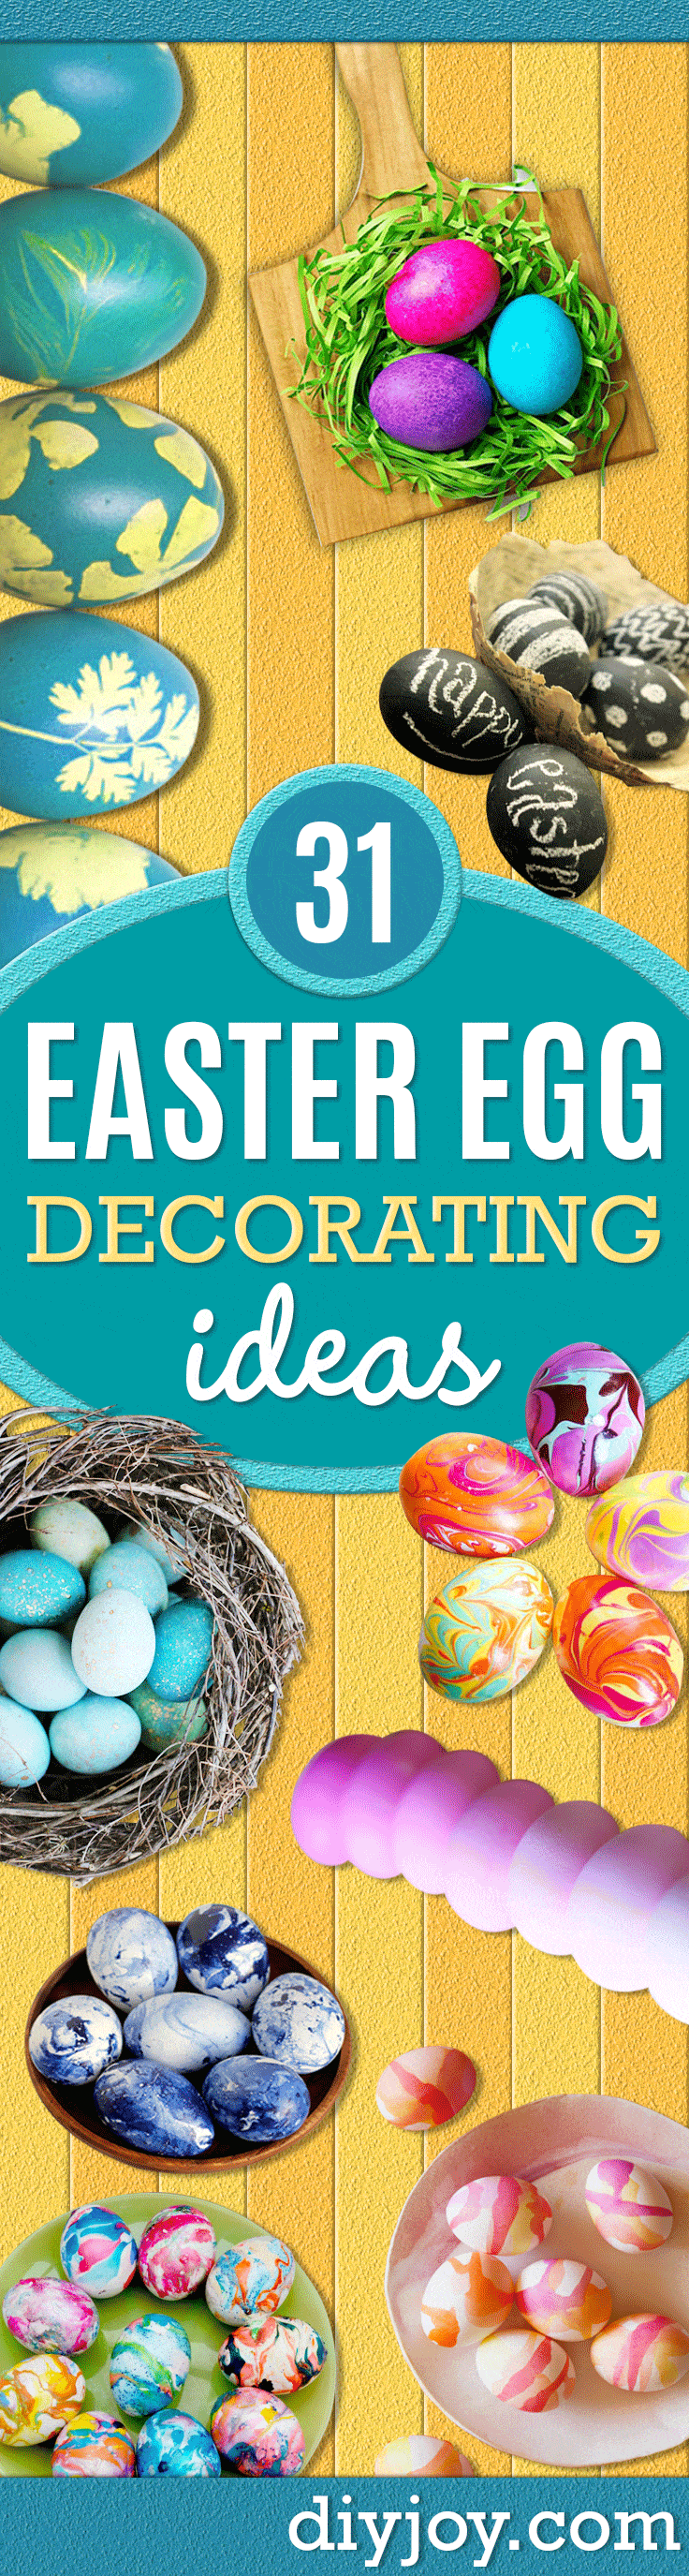 Easter Egg Decorating Ideas - Creative Egg Dye Tutorials and Tips - DIY Easter Egg Projects for Kids and Adults